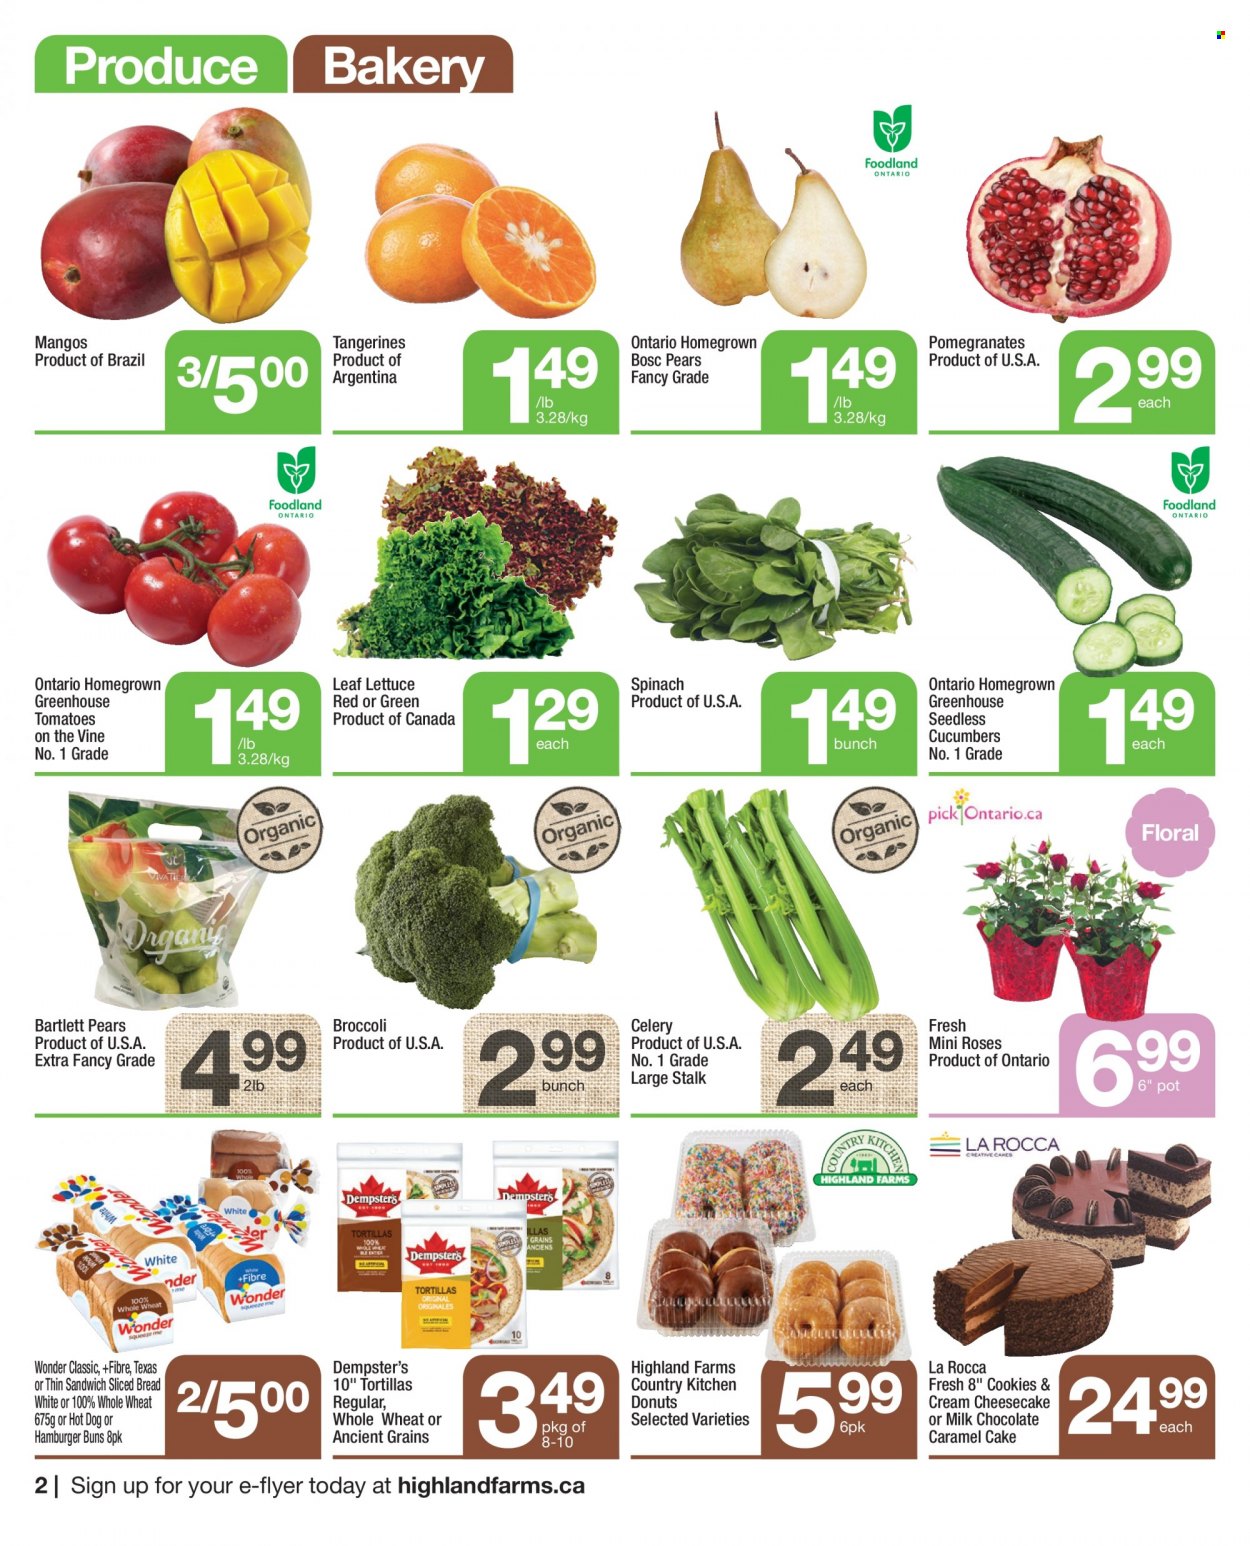 thumbnail - Highland Farms Flyer - September 23, 2021 - September 29, 2021 - Sales products - bread, tortillas, cake, buns, burger buns, cheesecake, donut, broccoli, celery, cucumber, lettuce, Bartlett pears, mango, tangerines, pears, pomegranate, hot dog, sandwich, cookies, milk chocolate, chocolate, caramel. Page 2.